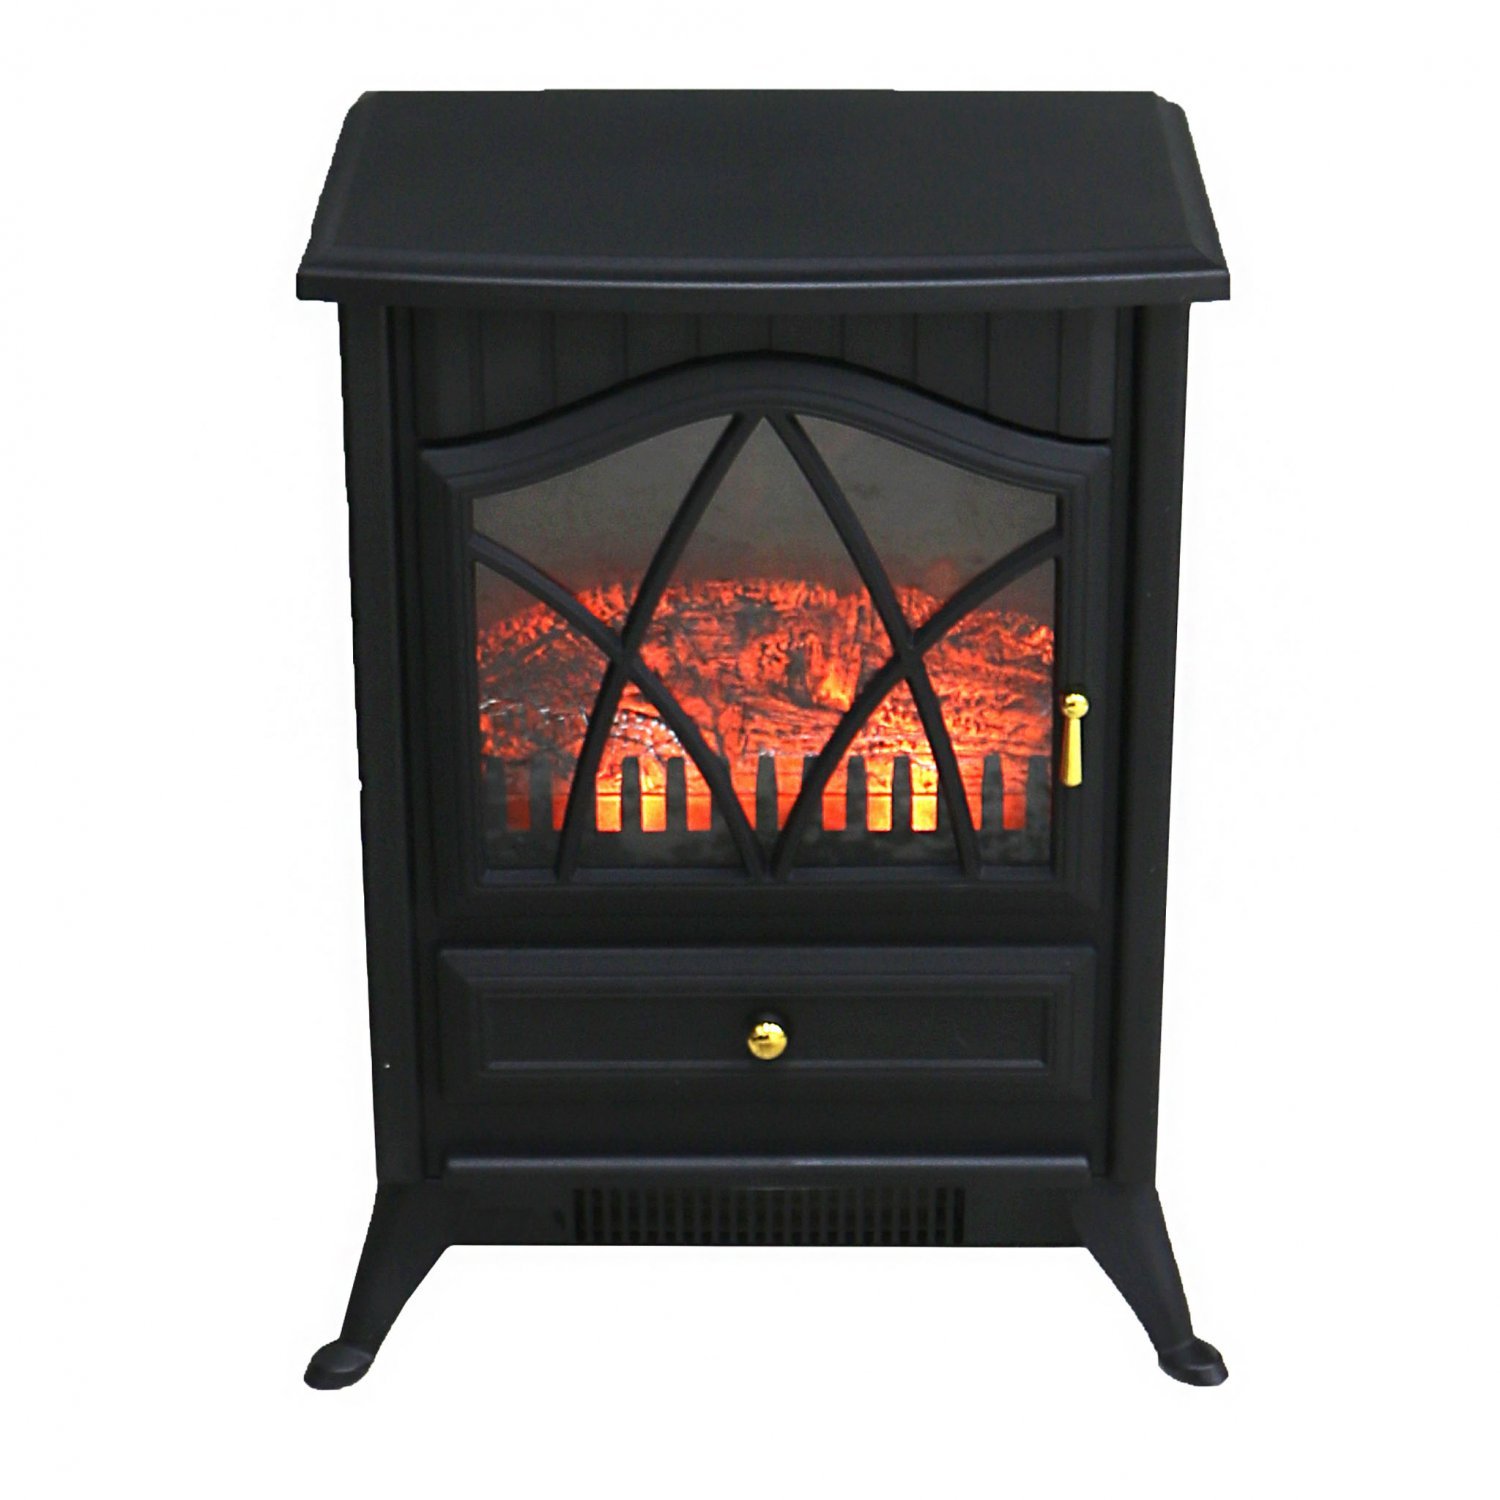 1850w Log Burner Flame Effect Electric Fireplace Stove Heater